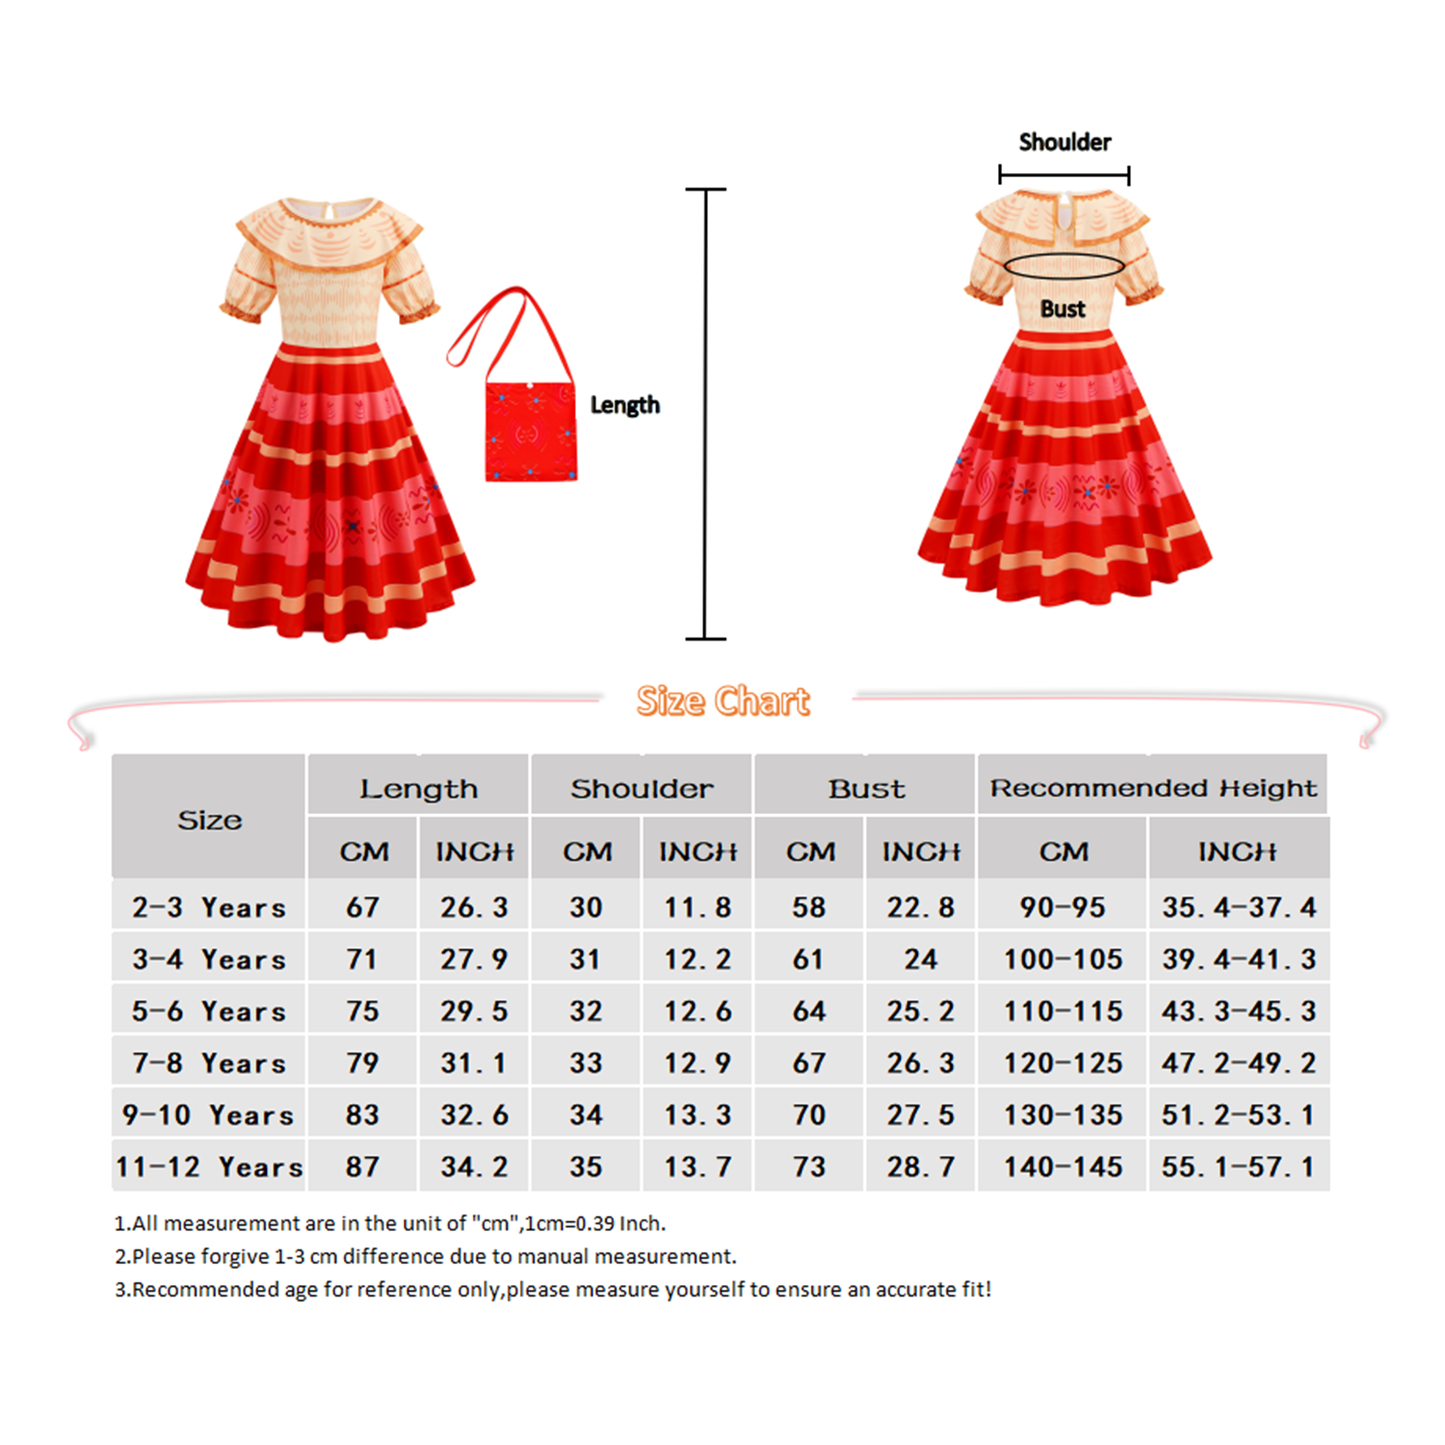 Foierp Girls Beautiful Dress - Fancy Costume Dress with Necklace Red Bow